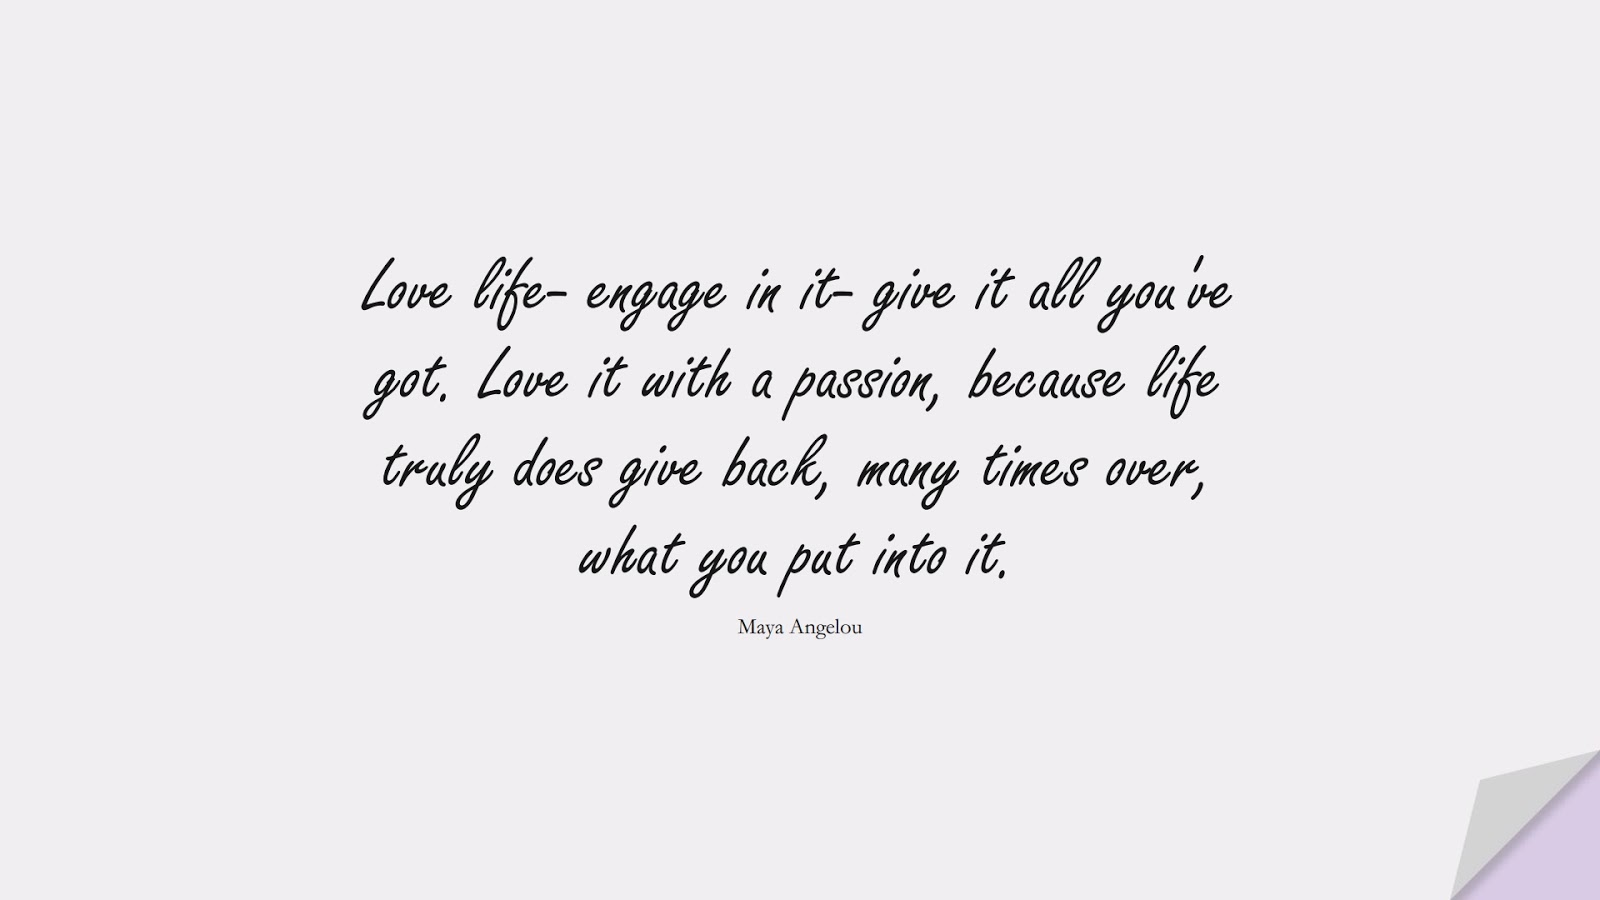 Love life- engage in it- give it all you've got. Love it with a passion, because life truly does give back, many times over, what you put into it. (Maya Angelou);  #InspirationalQuotes